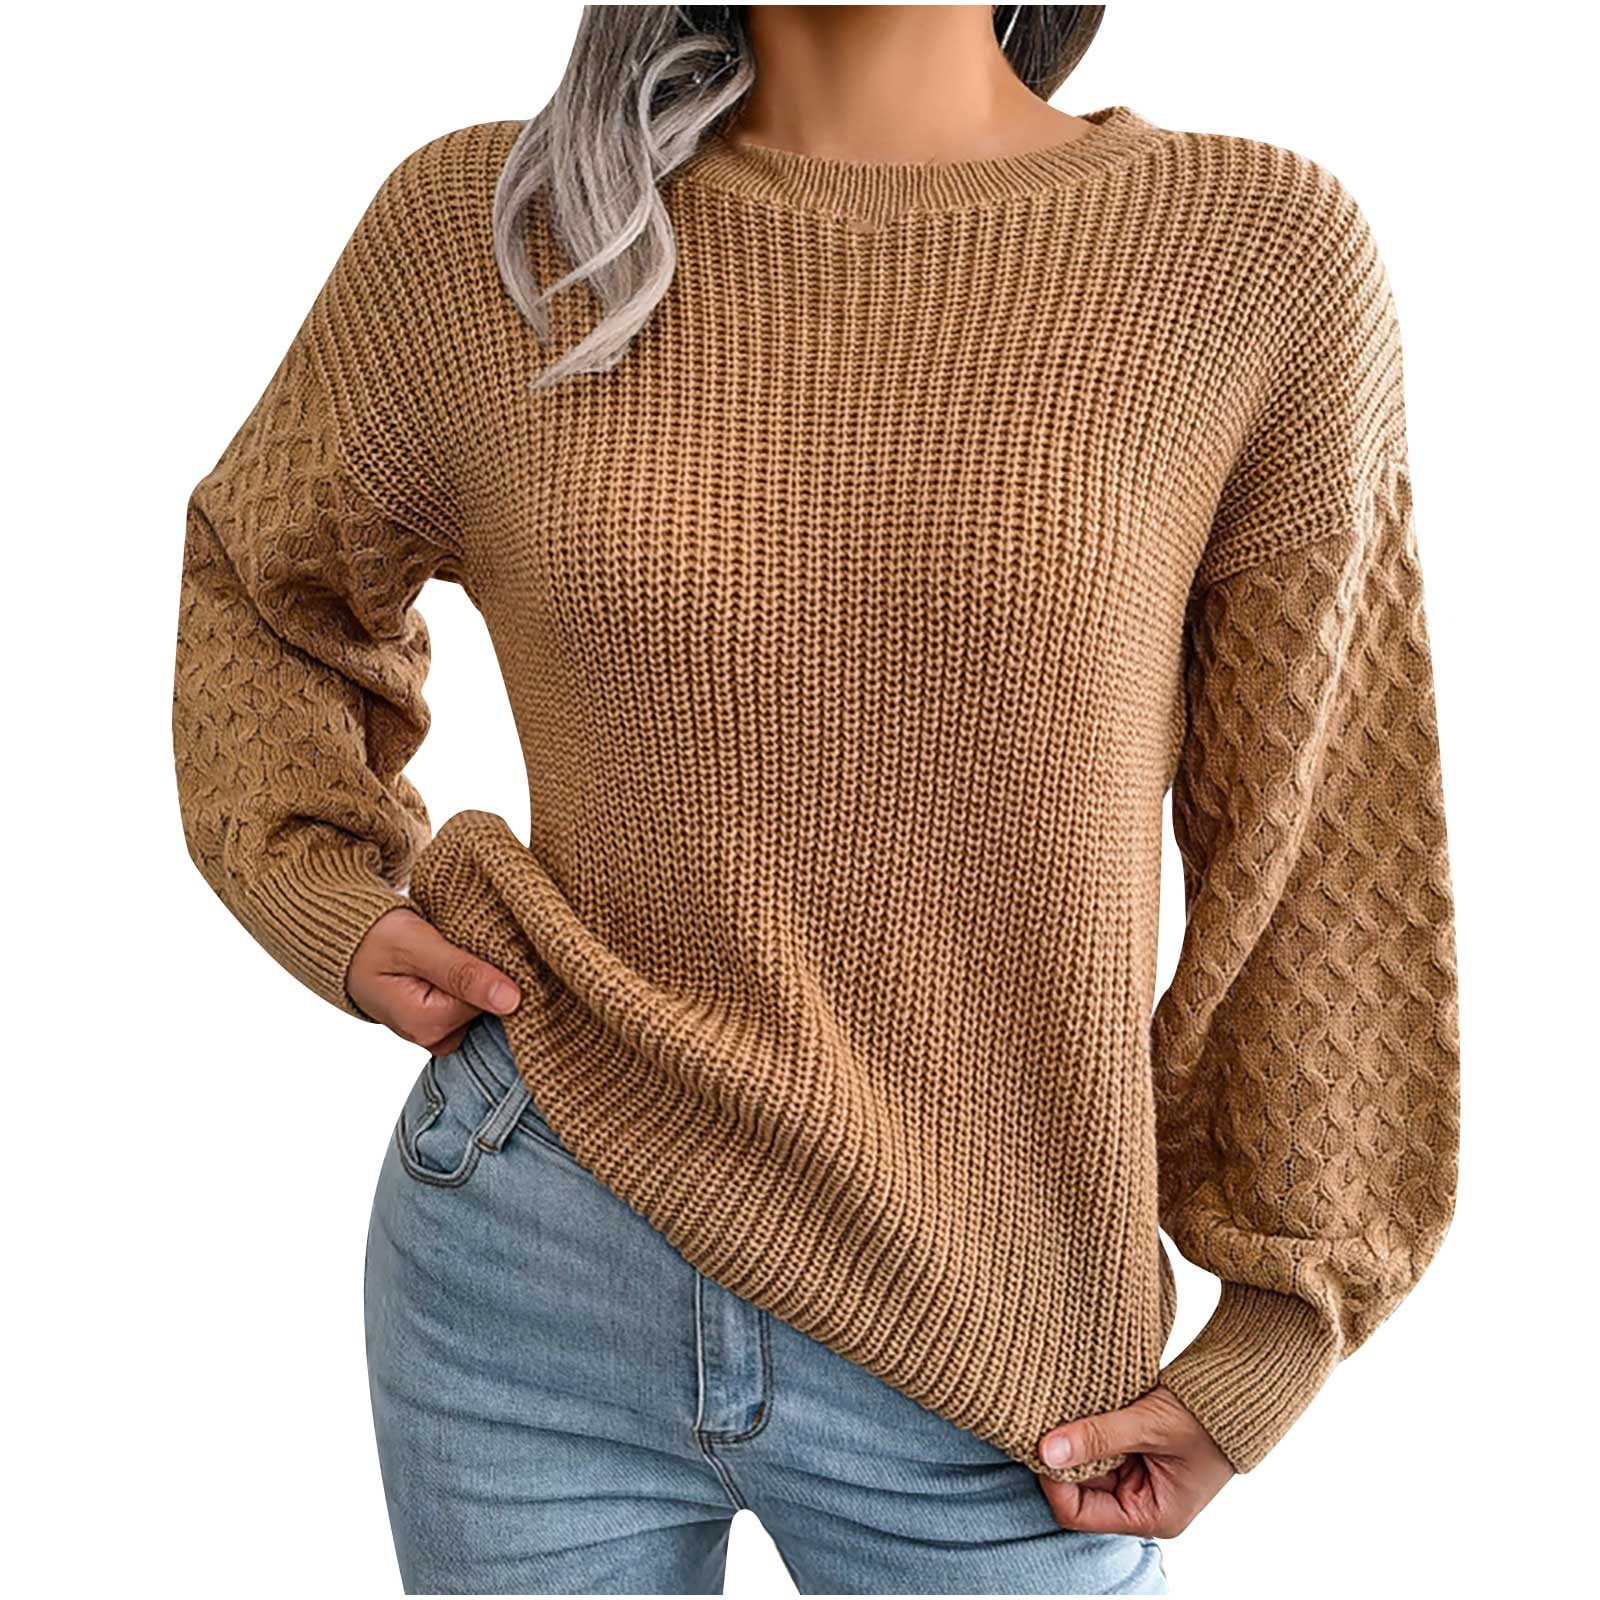 Oversized Sweaters for Women Fashion Casual Colorful Long Sleeve Off  Shoulder Knit Sweater Crew Neck Sweater Fall Tops On Sale White M - Walmart. com